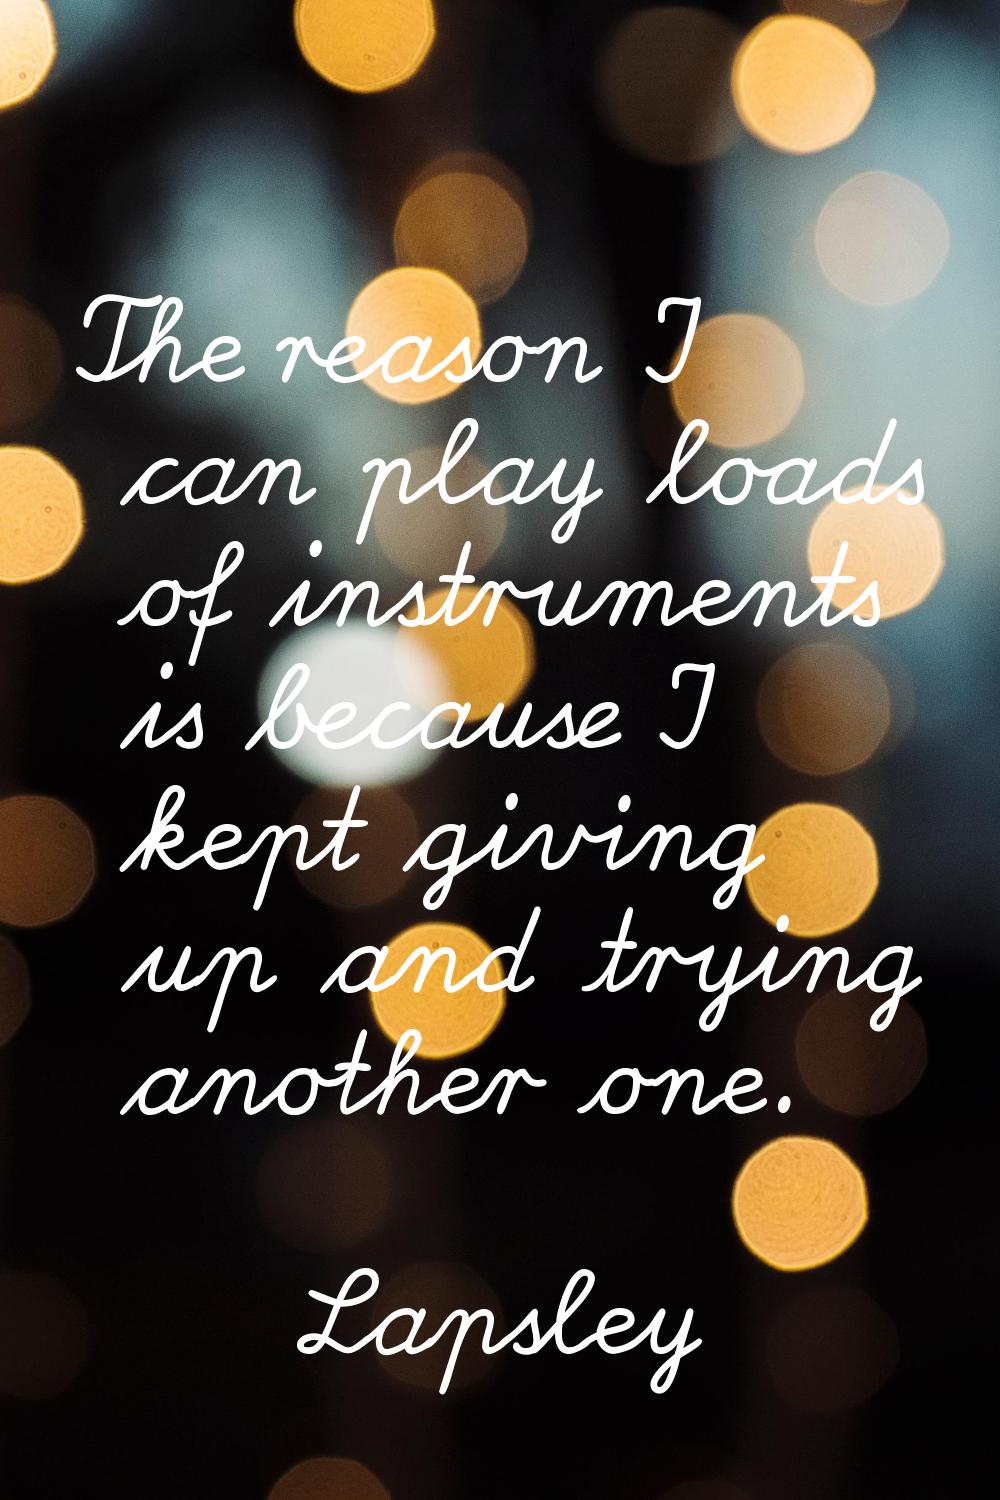 The reason I can play loads of instruments is because I kept giving up and trying another one.